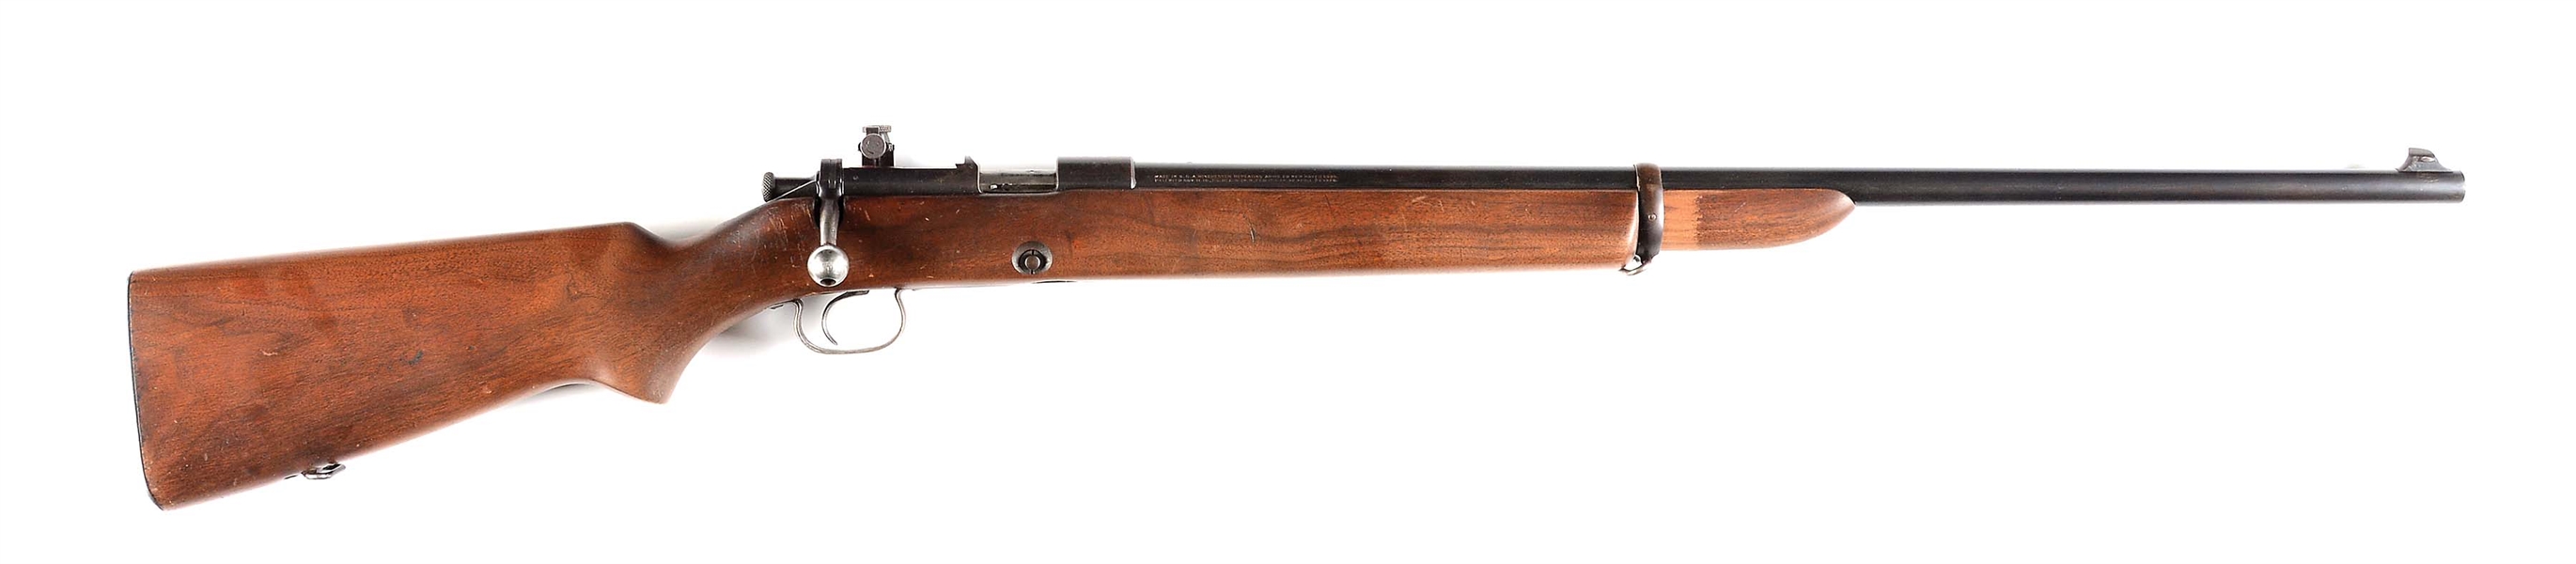 (C) WINCHESTER MODEL 52A BOLT ACTION TARGER RIFLE